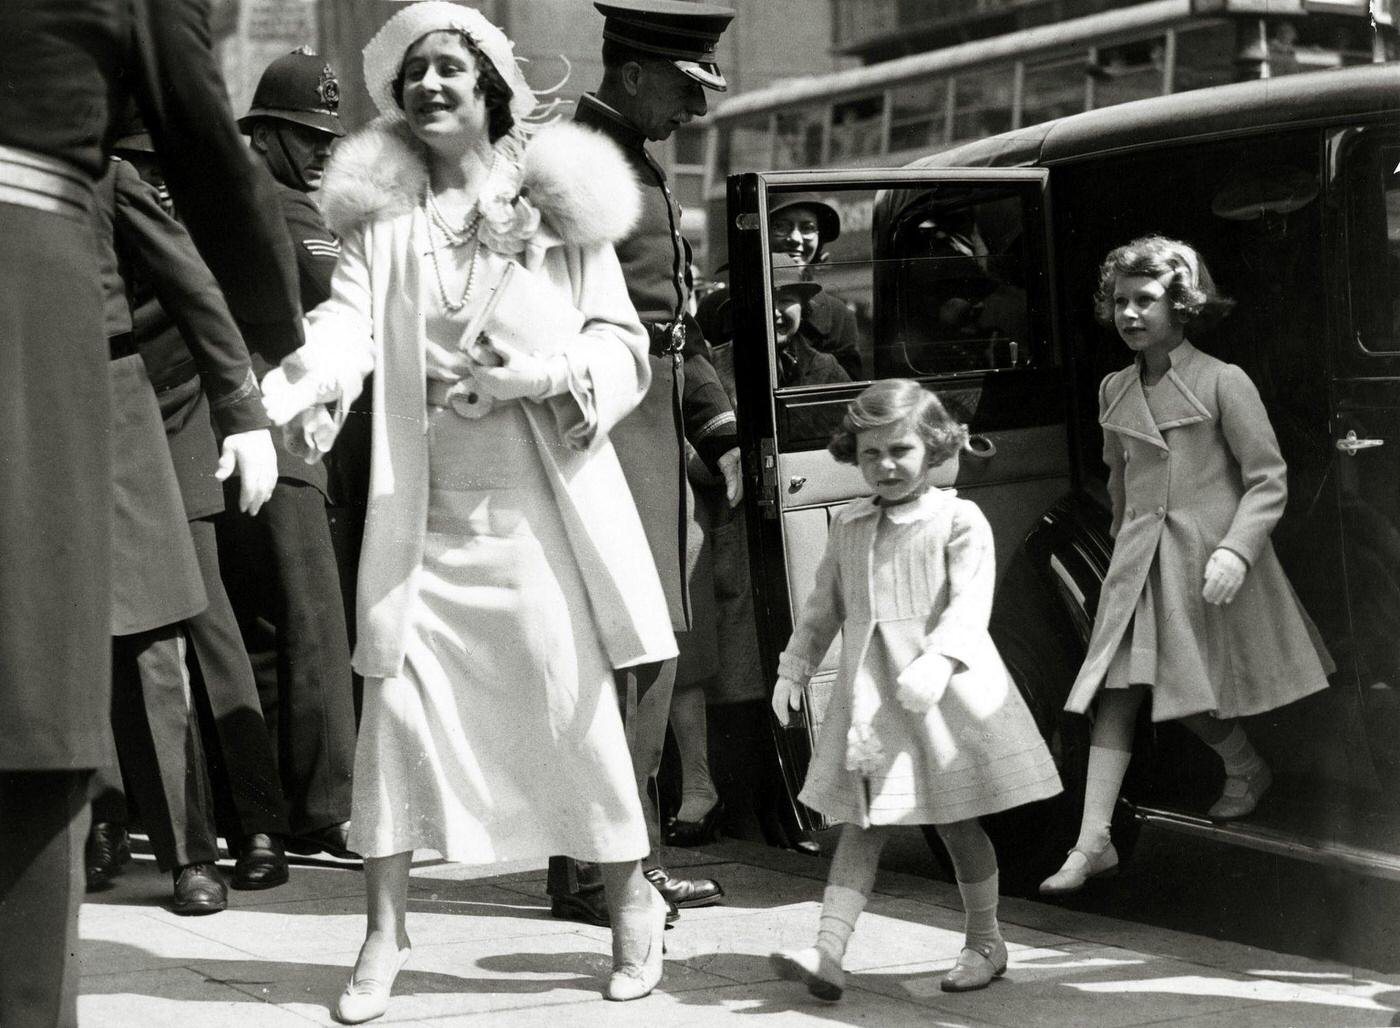 Duchess of York with Princesses Margaret and Elizabeth arriving at the Royal Tournament, Olympia, London, 1935.